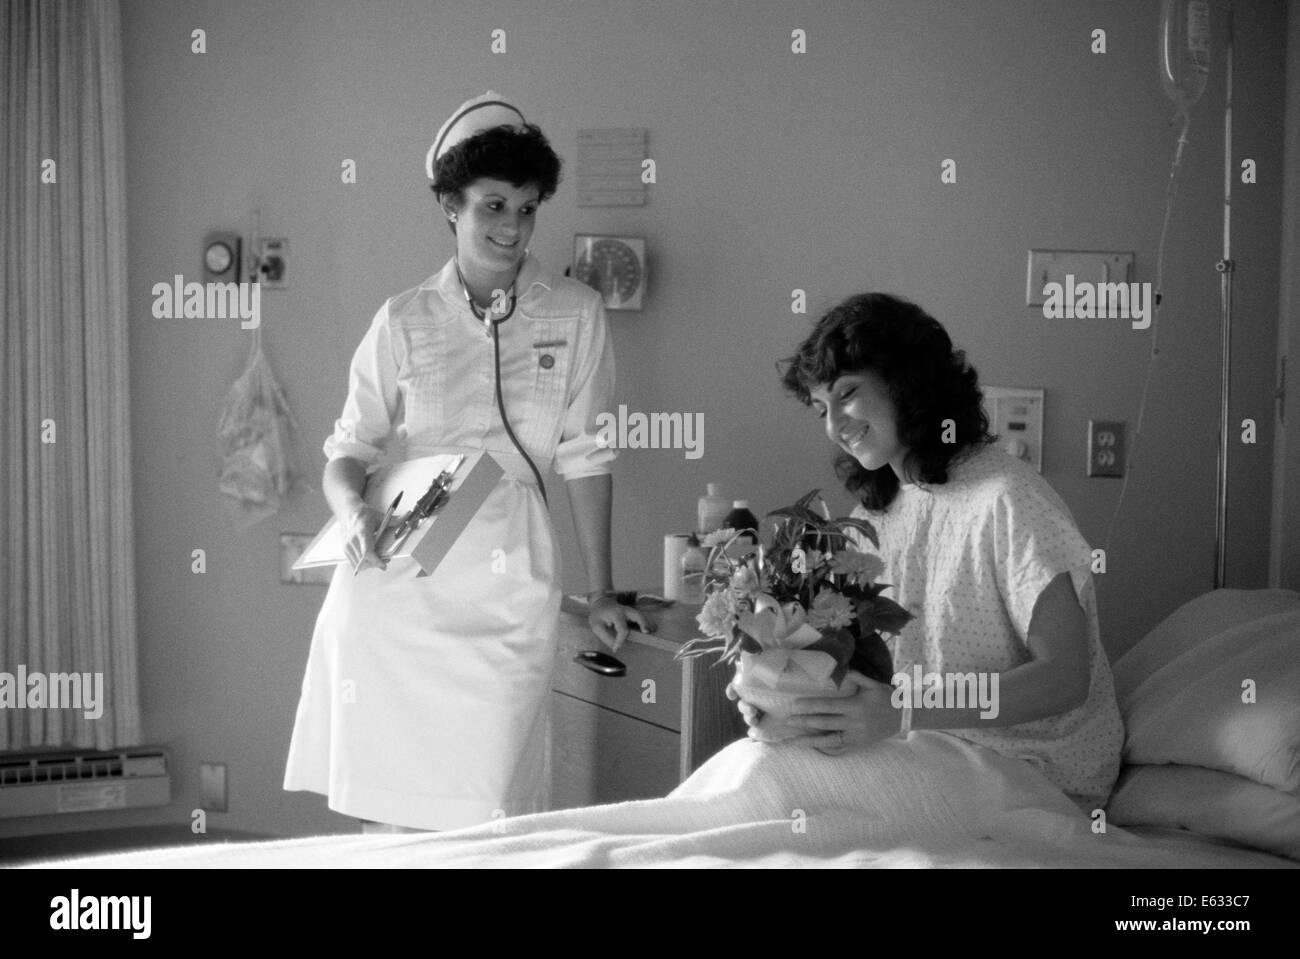 1980s SMILING FEMALE PATIENT SITTING UP IN HOSPITAL BED HOLDING FLOWER ARRANGEMENT SMILING FEMALE NURSE HOLDING CHART LOOKING ON Stock Photo